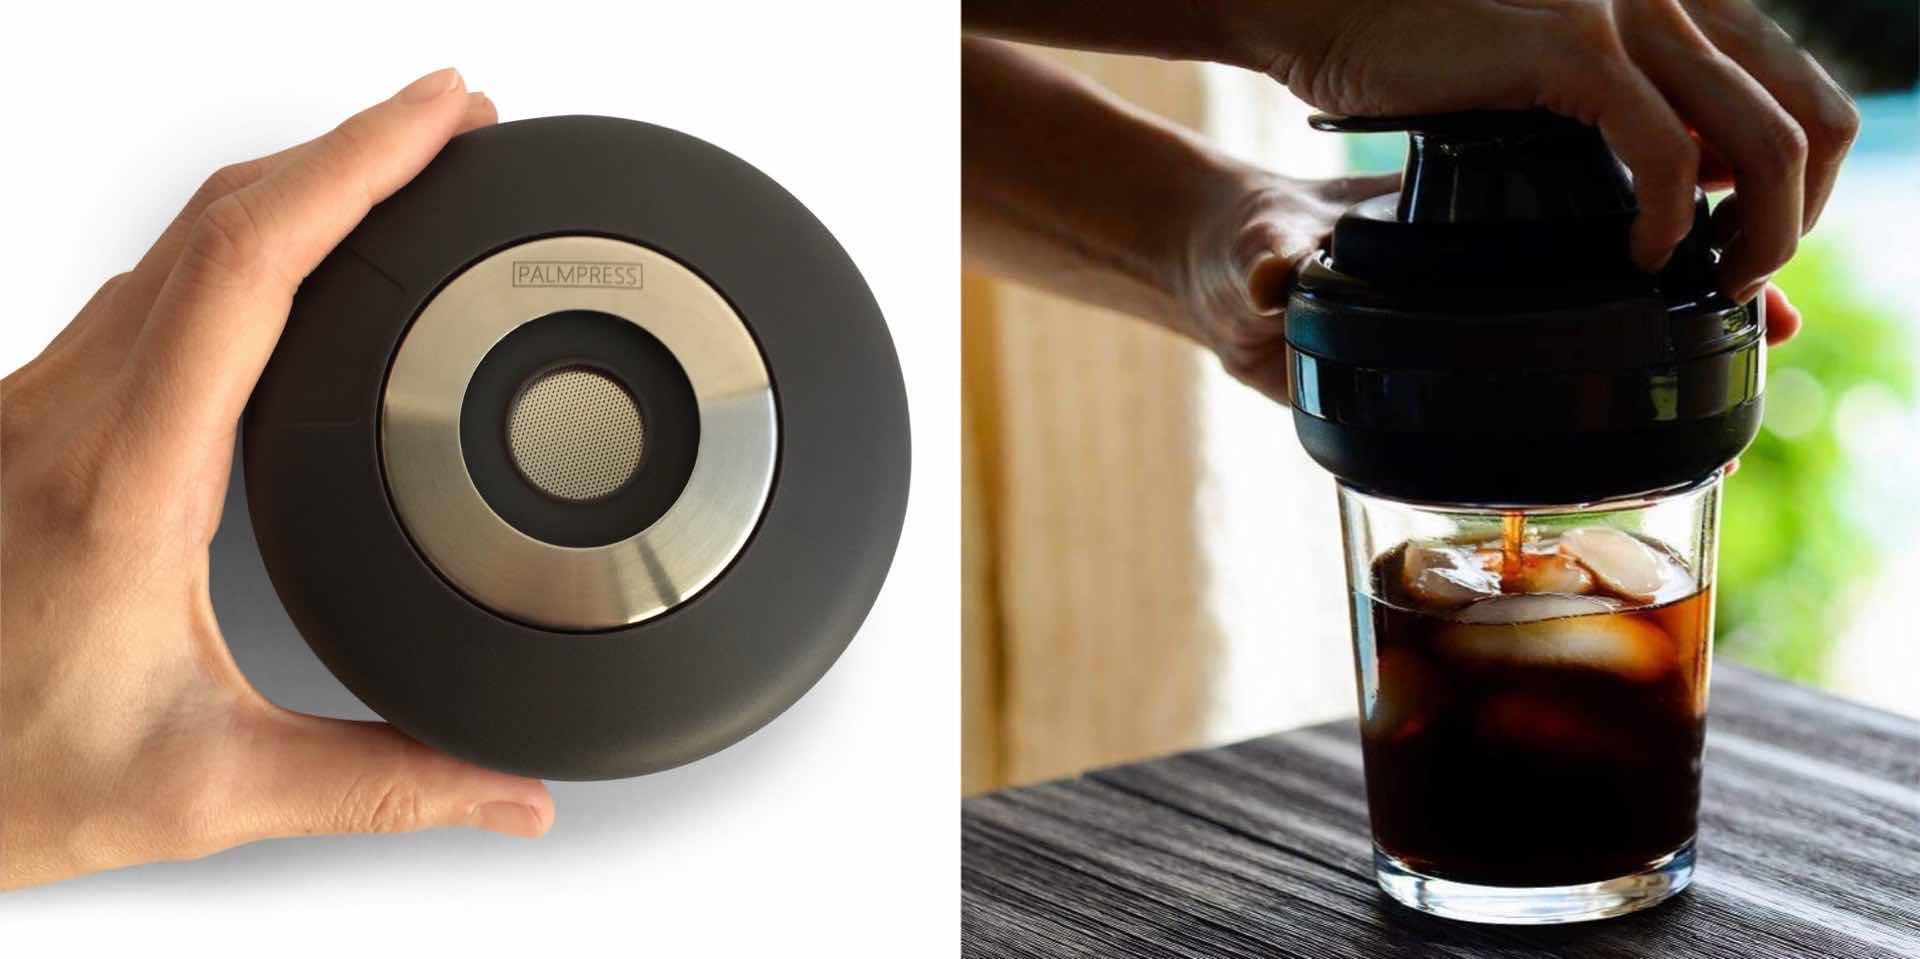 The Palmpress collapsible coffee press. ($39 in black or eggshell blue)